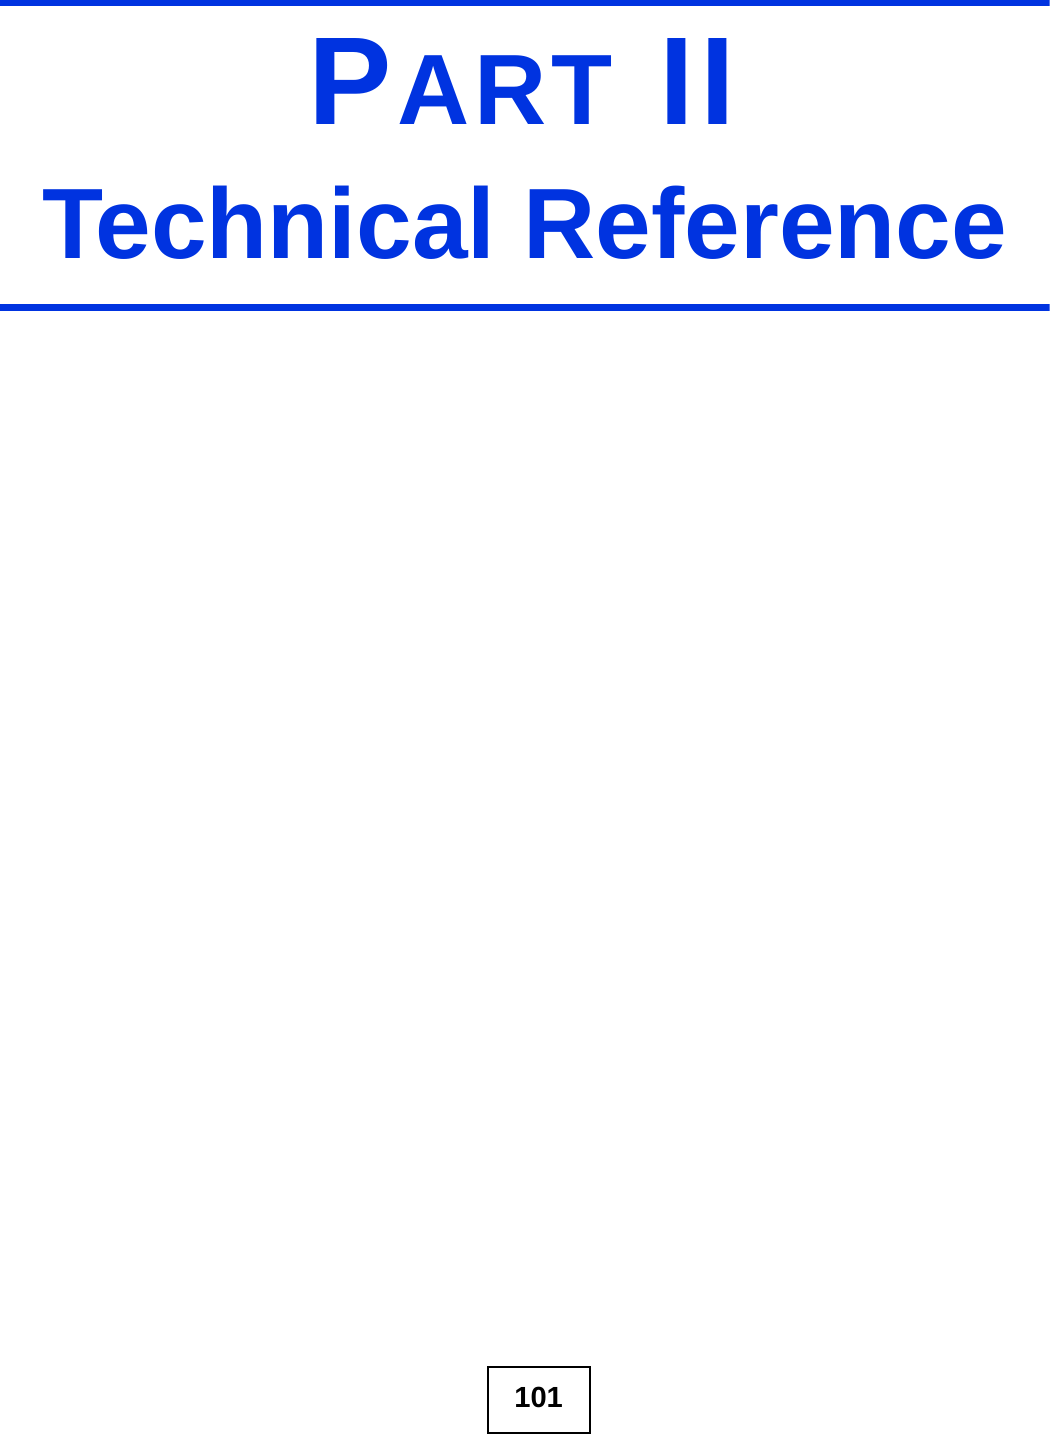 101PART IITechnical Reference